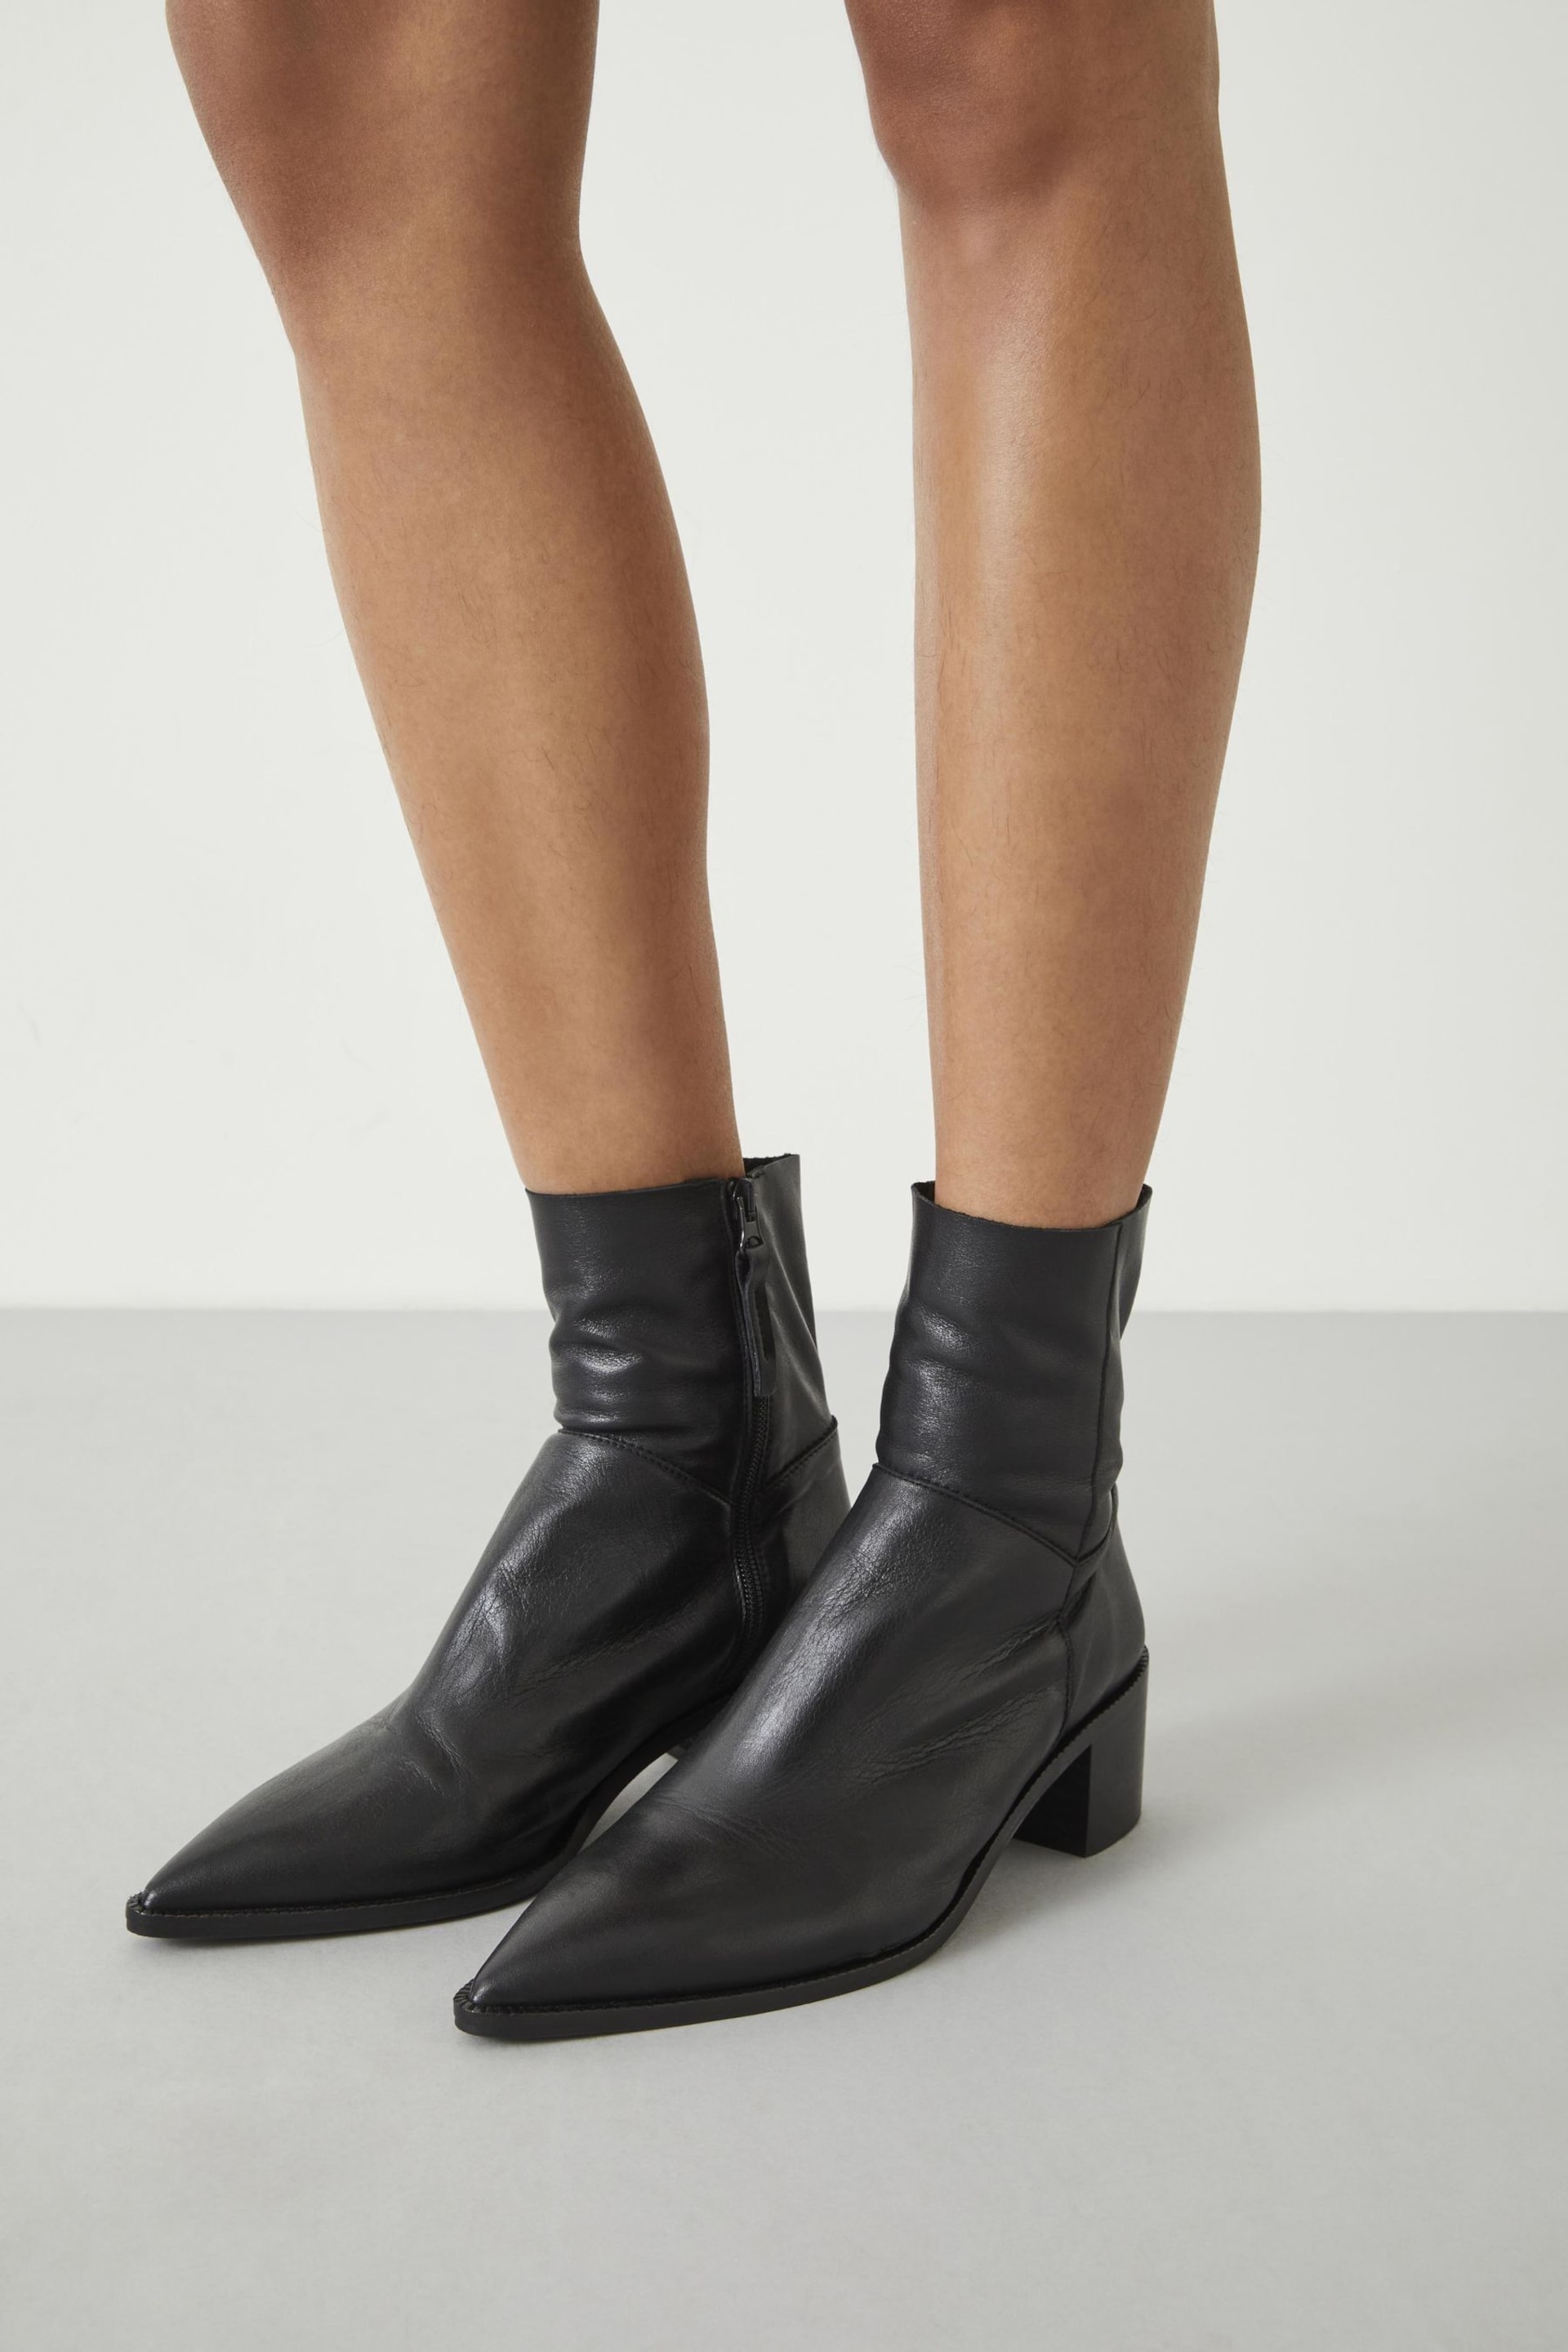 Hush Black Taylah Ankle Boots - Image 1 of 5